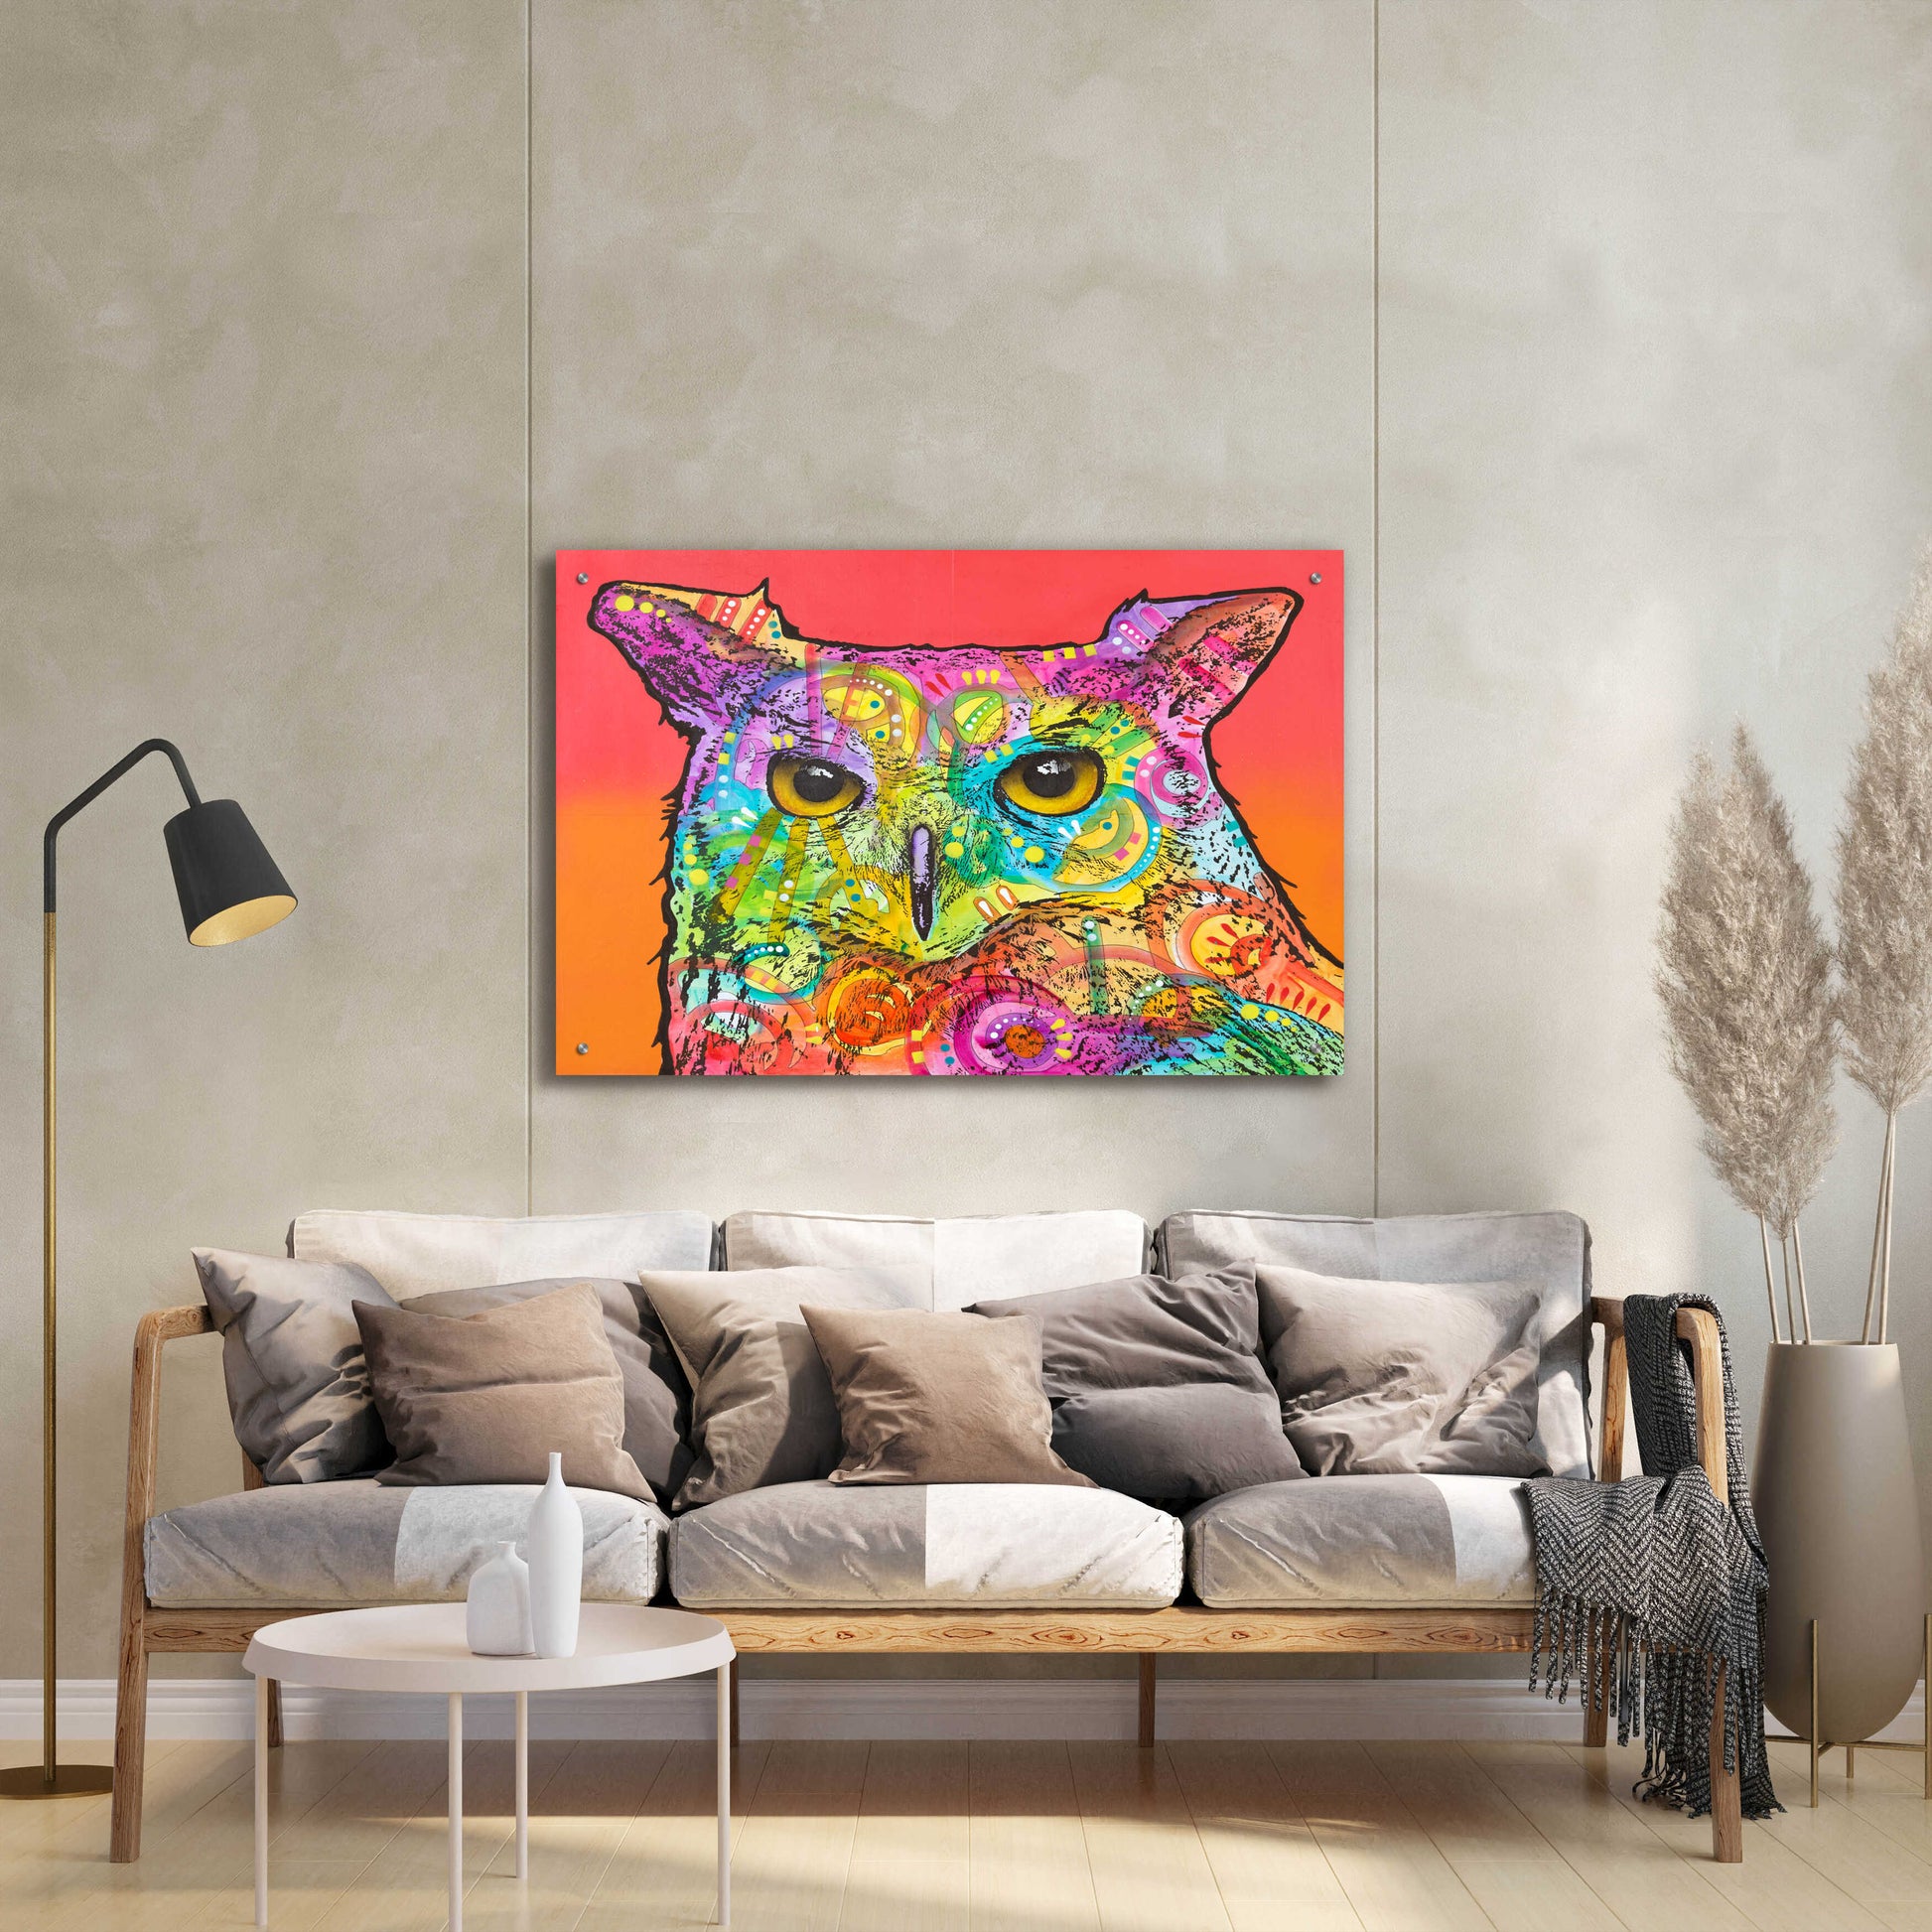 Epic Art 'Red Owl' by Dean Russo, Acrylic Glass Wall Art,36x24